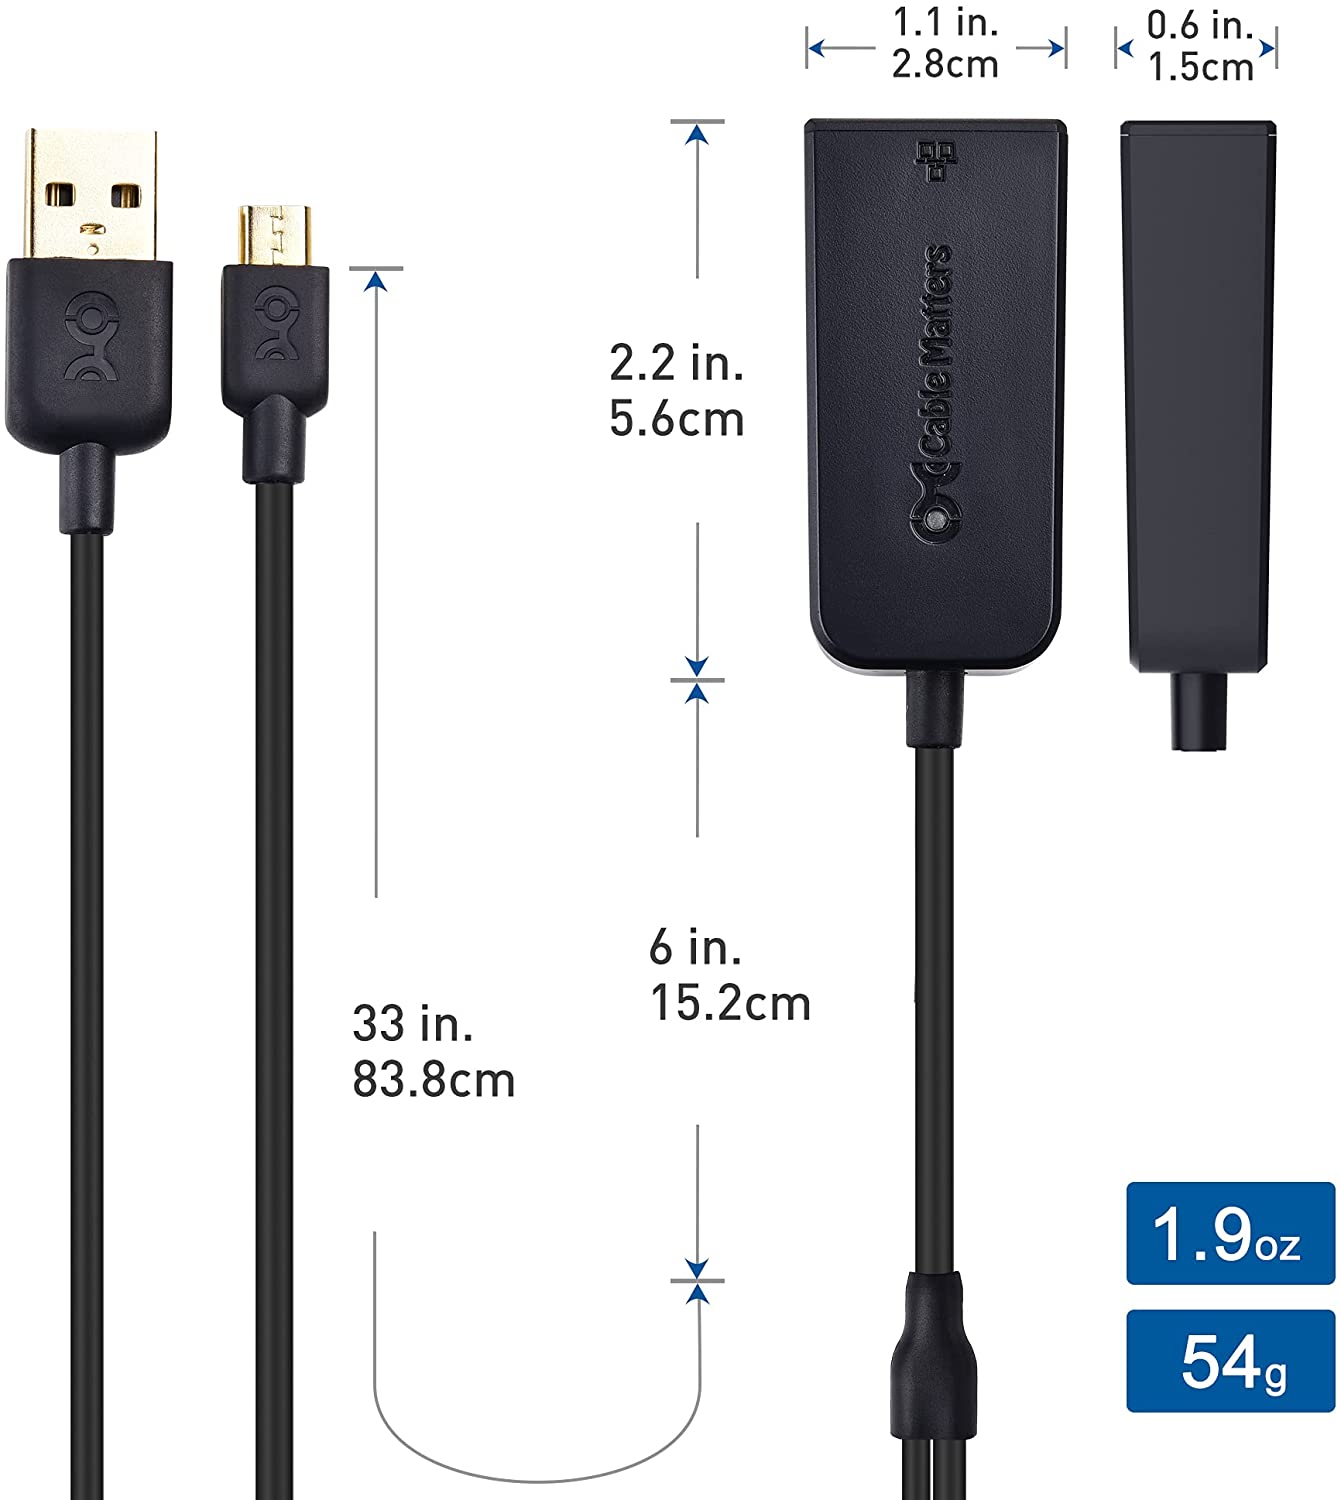 Cable Matters Micro USB to Ethernet Adapter Up to 480Mbps for Streaming Sticks Including Chromecast, Google Home Mini and More - Not Compatible with Roku Device - image 4 of 7